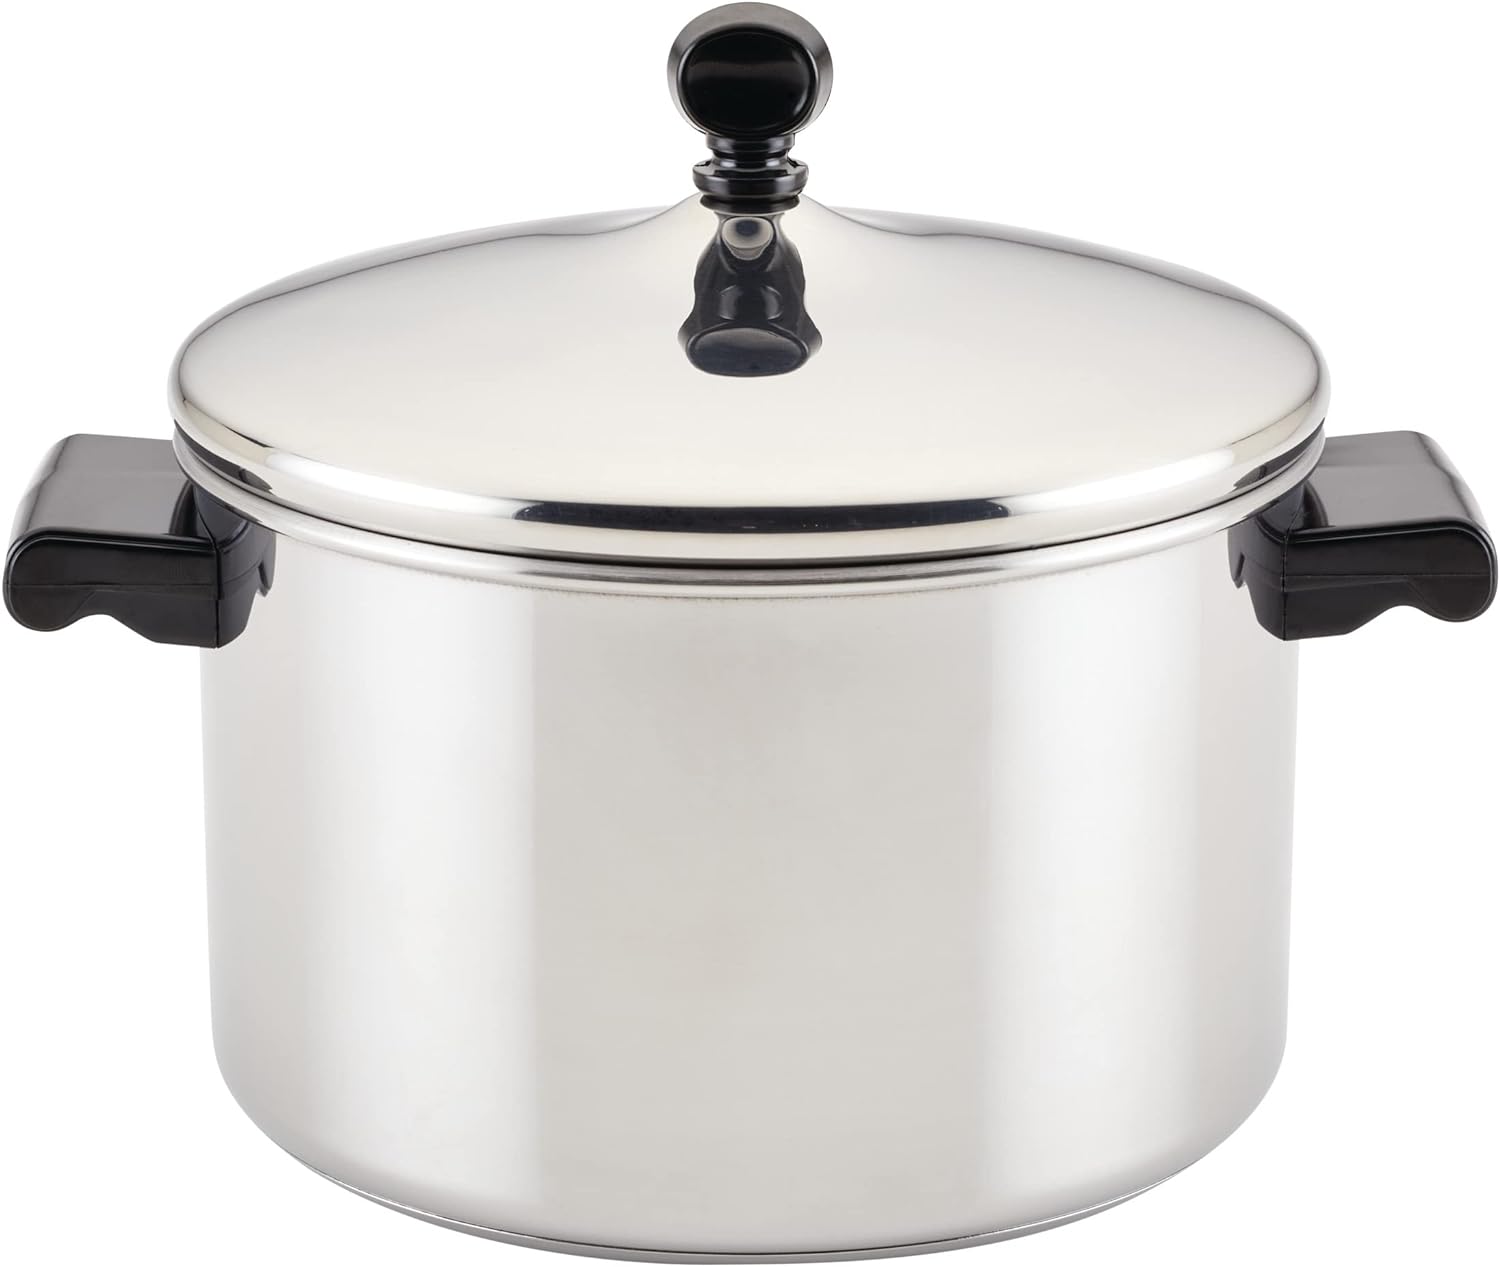 Badge<br>Farberware Classic Stainless Steel 4-Quart Covered Saucepot